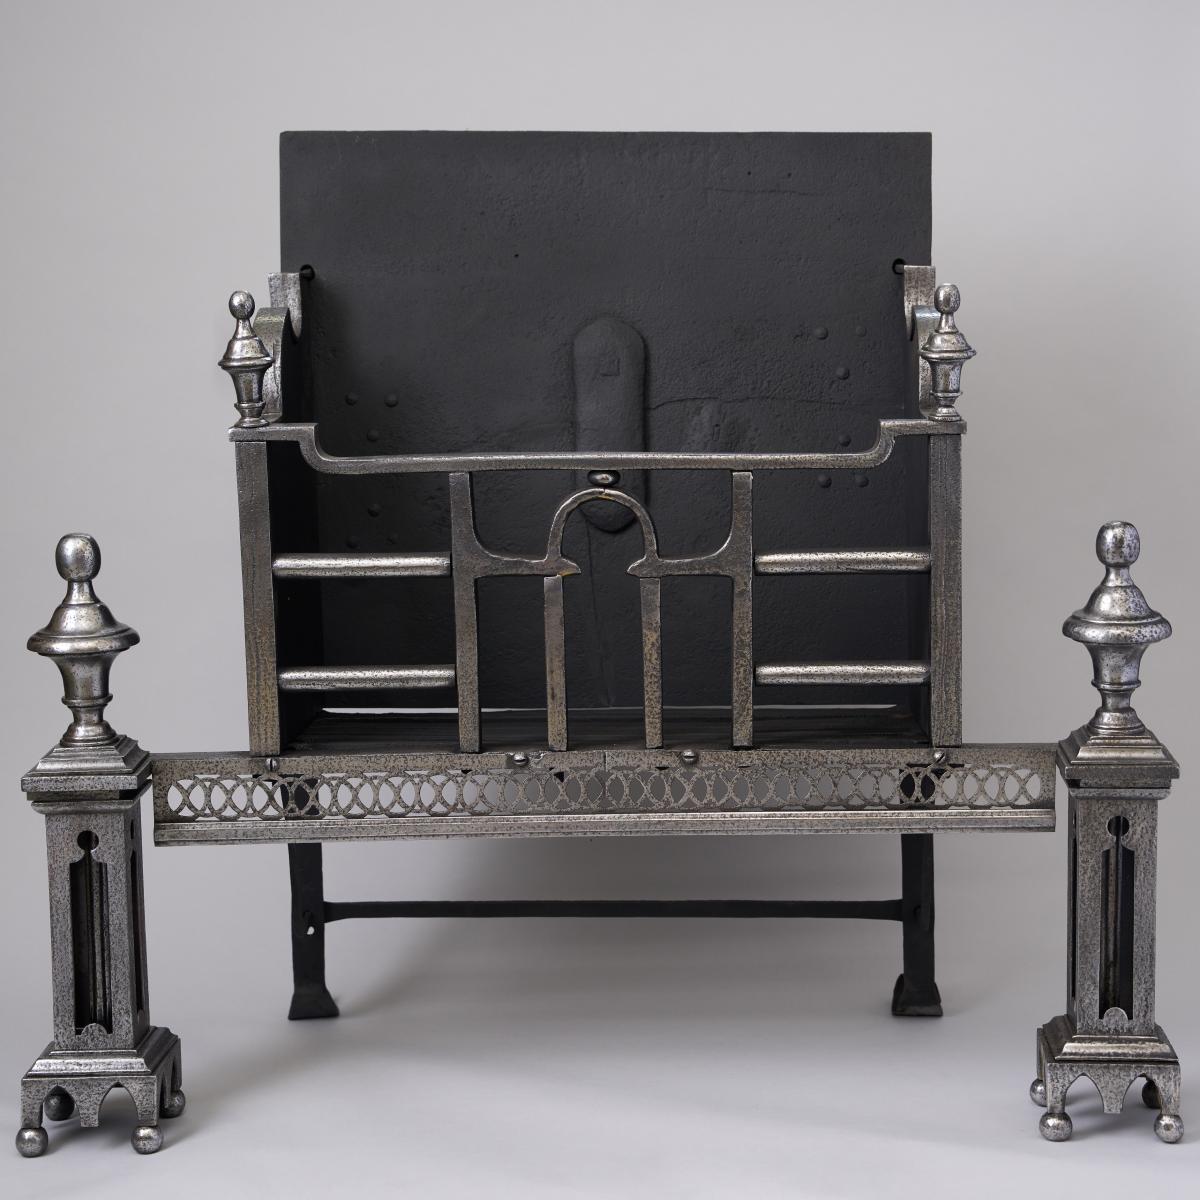 A n 18th century English wrought and cast iron coal grate